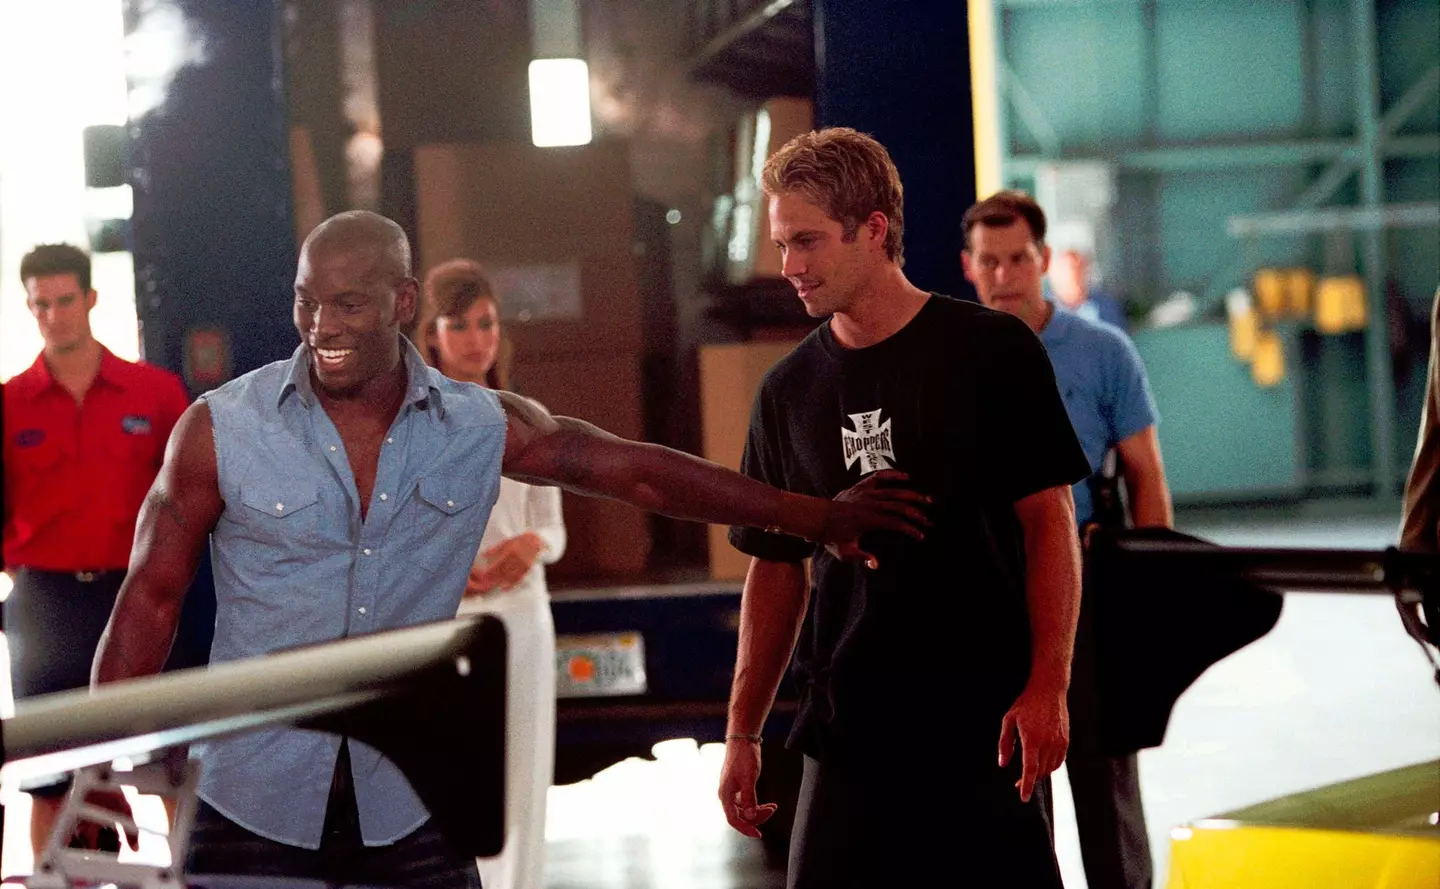 Paul Walker and Tyrese Gibson on the set of 2 Fast 2 Furious in 2003.